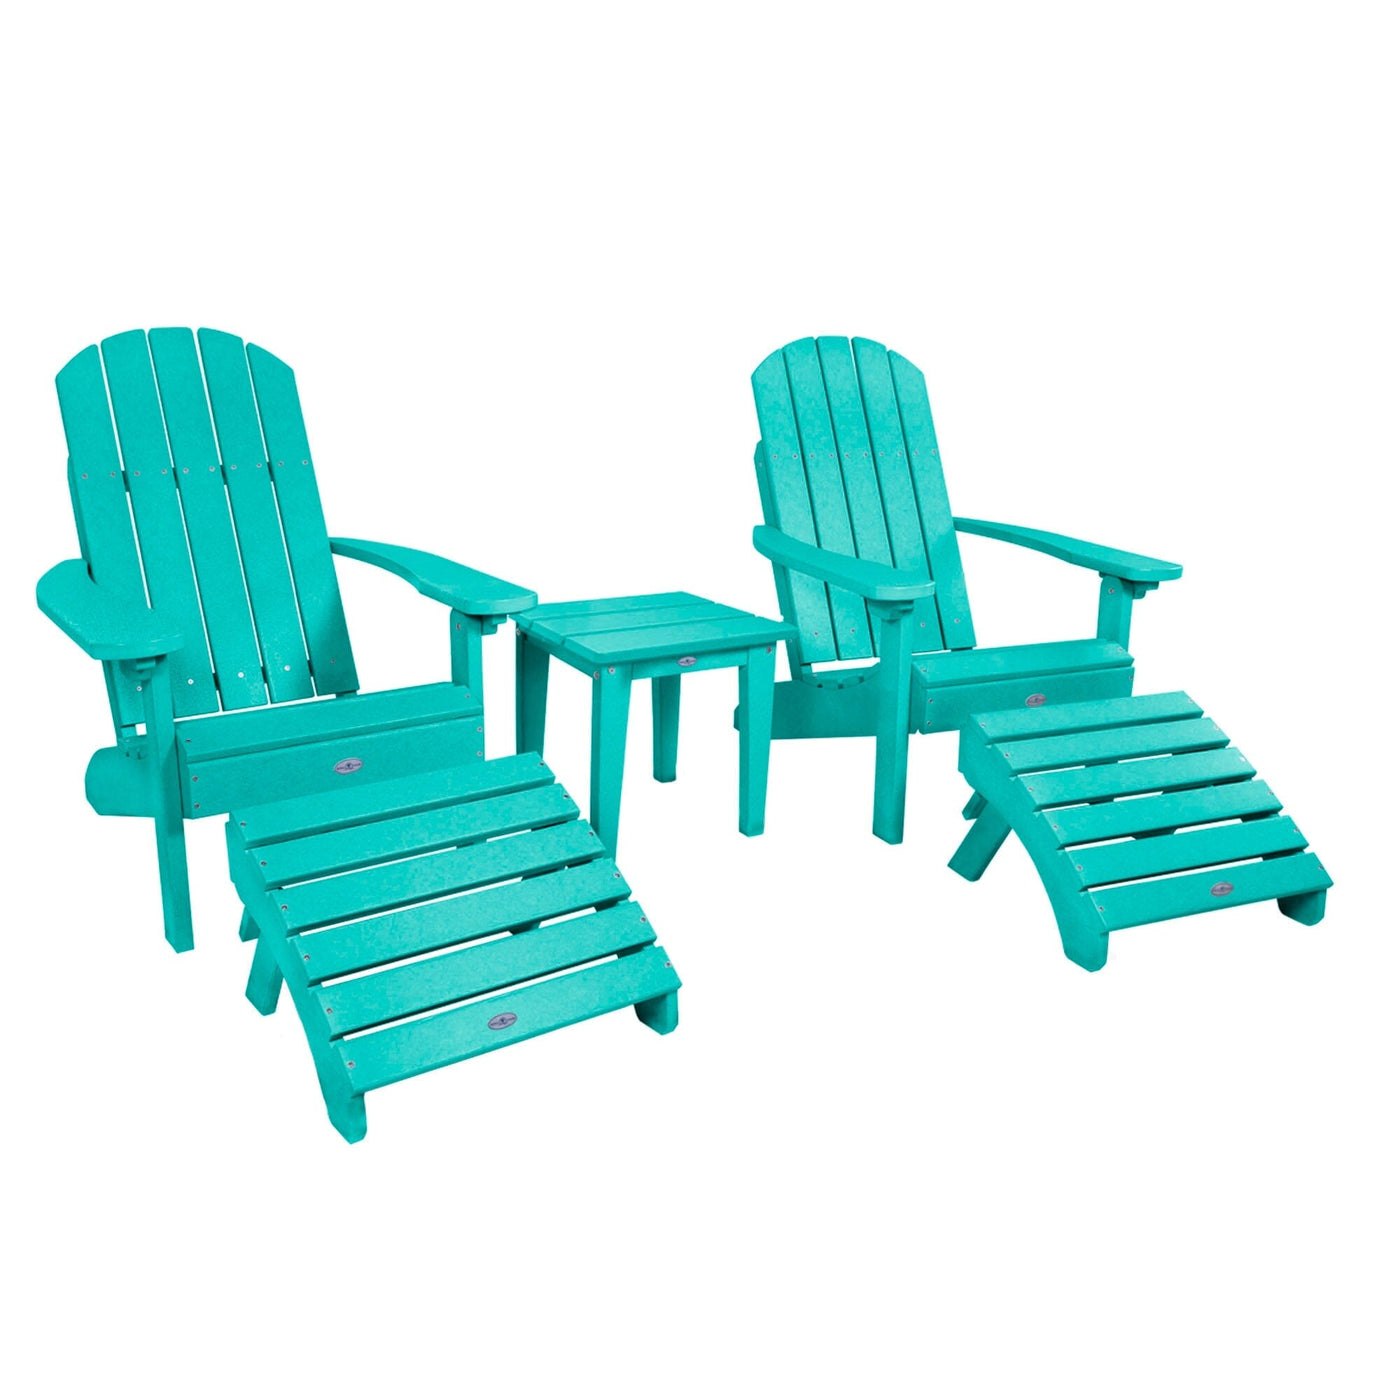 Two Cape Classic Adirondack Chairs, Side Table and Ottoman 5 pc Set Kitted Set Bahia Verde Outdoors Seaglass Blue 